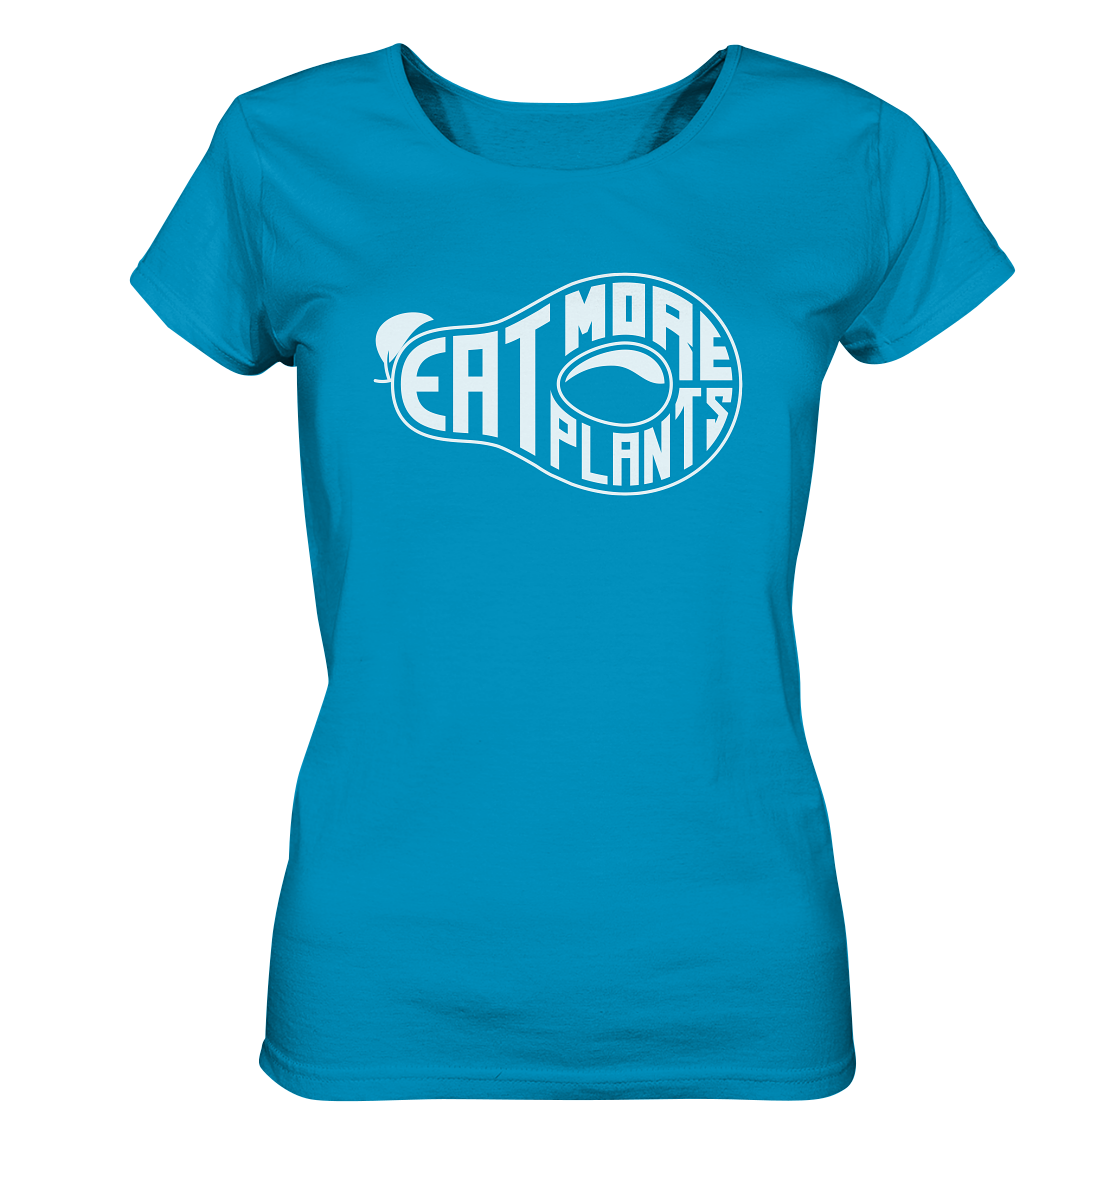 Organic ladies fitted scoop neck t-shirt in azul blue saying Eat More Plants